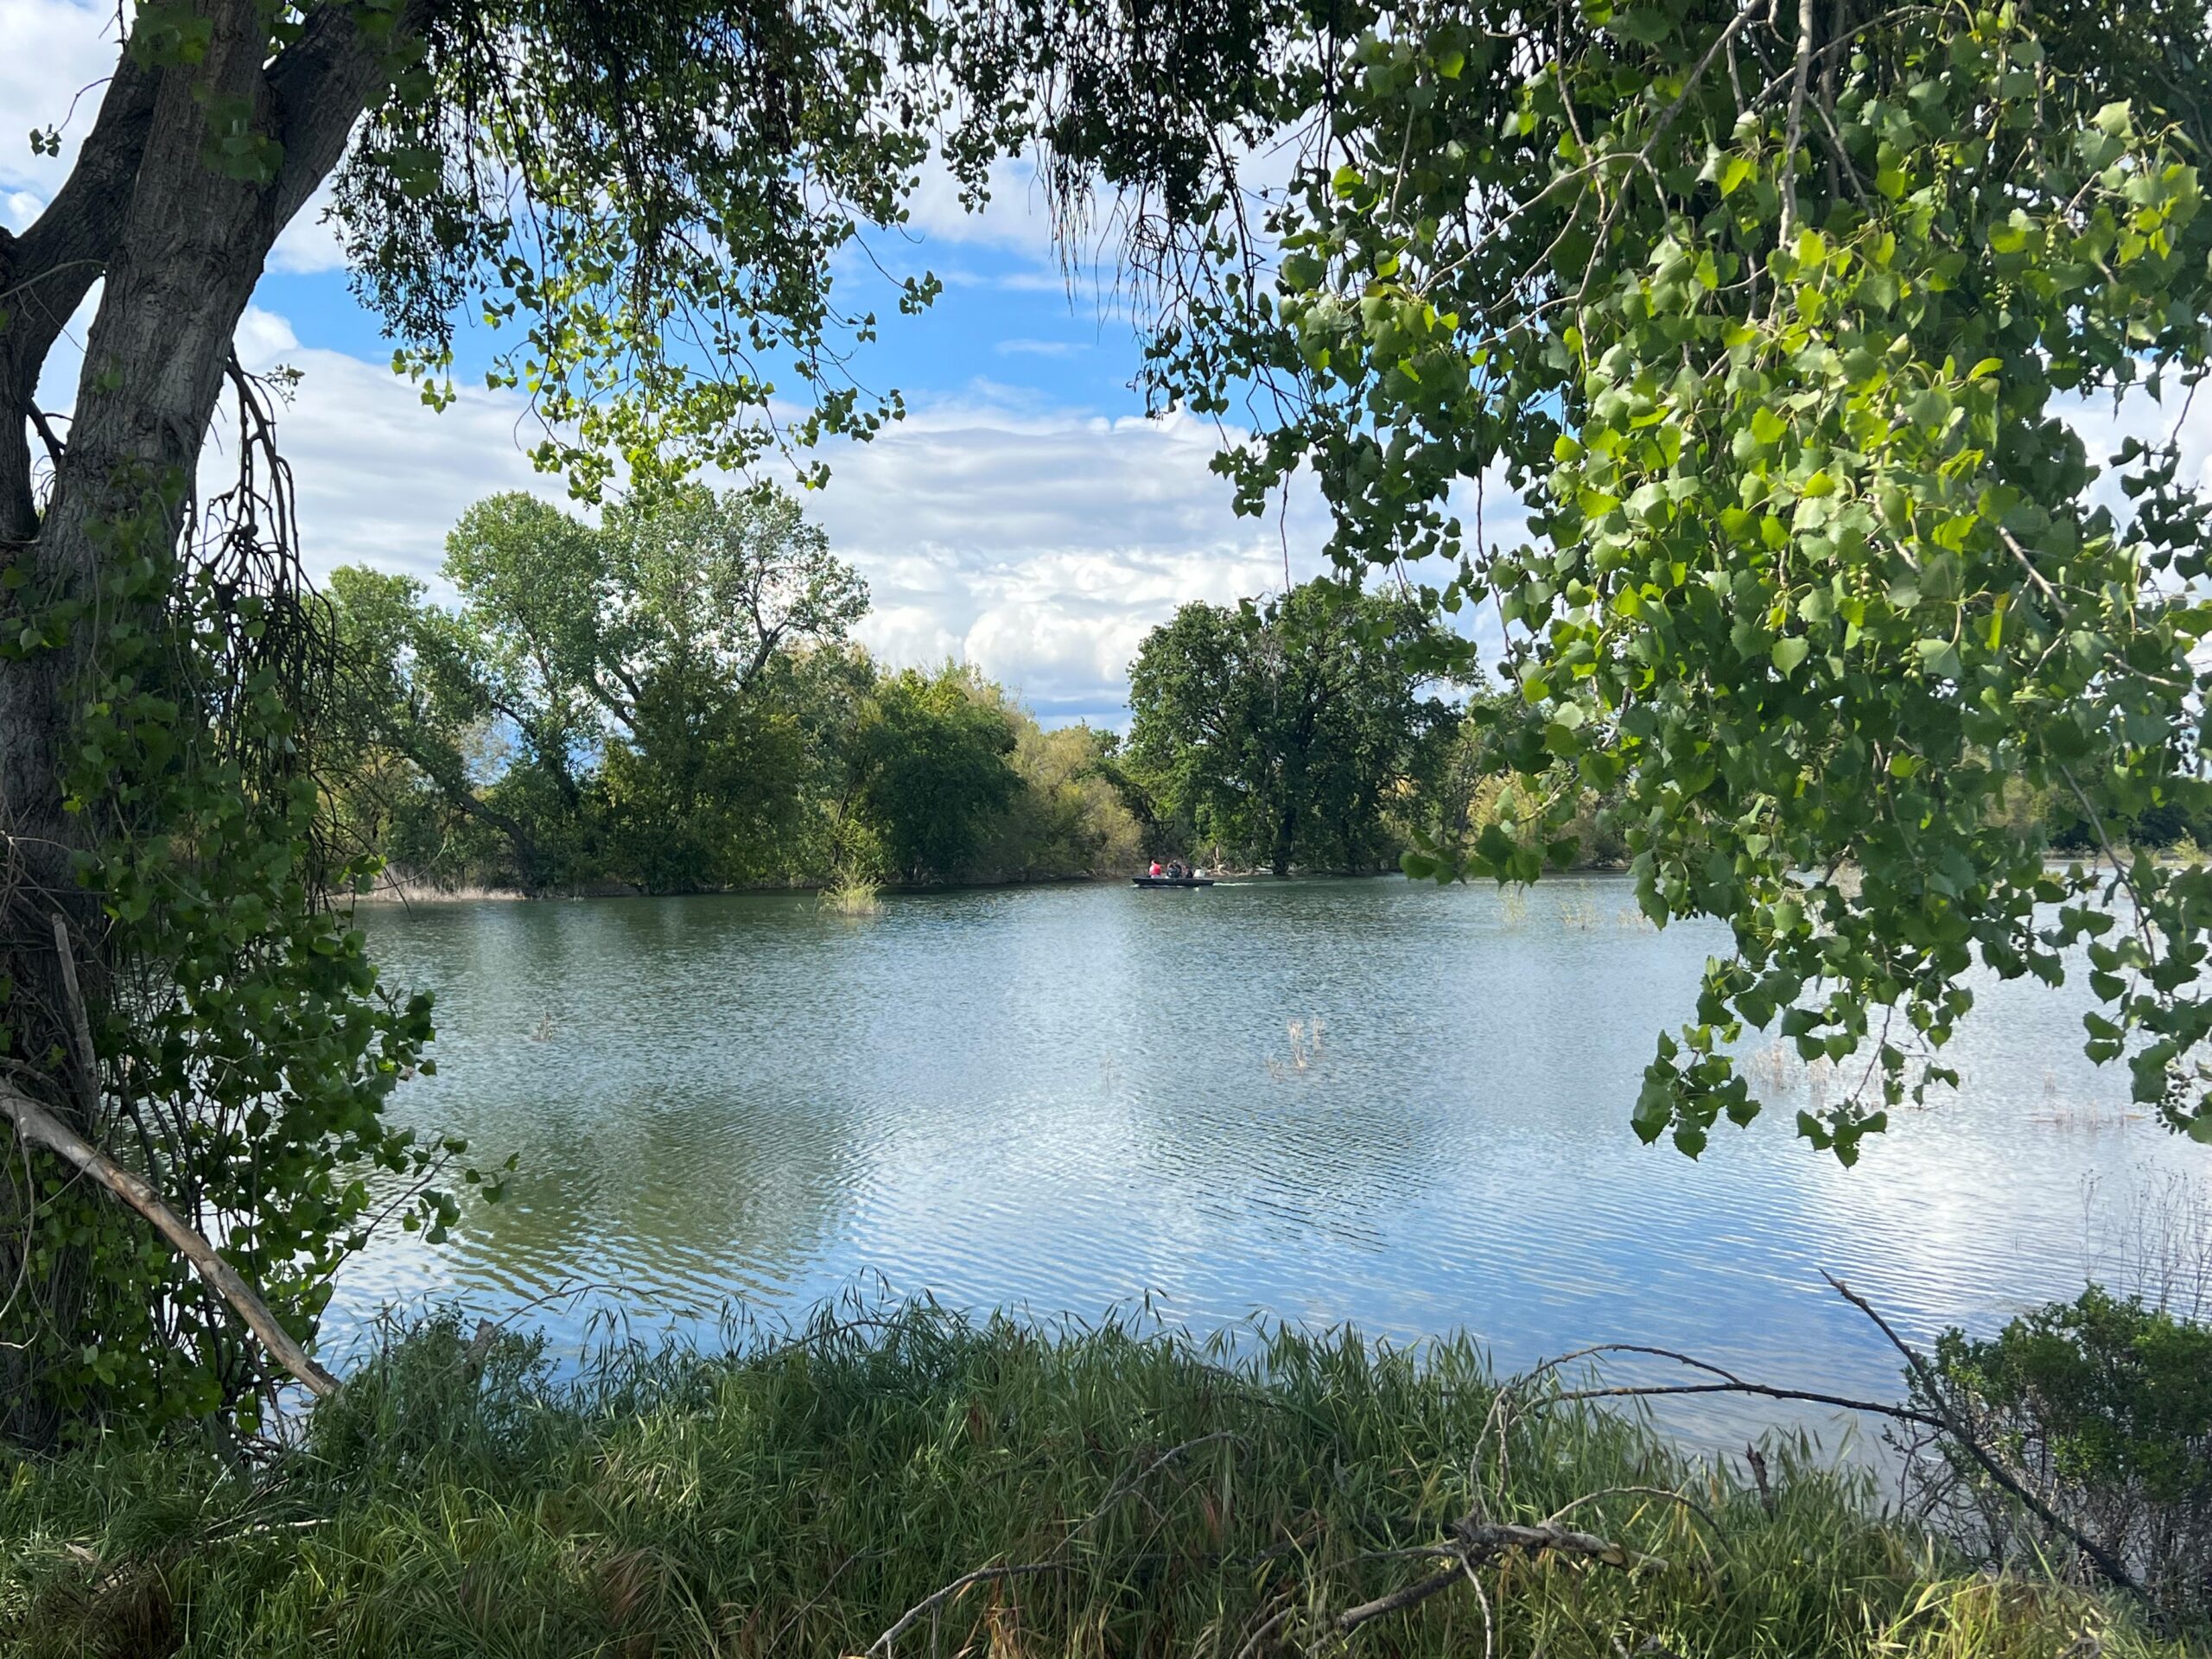 A glimpse of a body of water at Dos Rios Ranch Preserve through a cluster of trees.